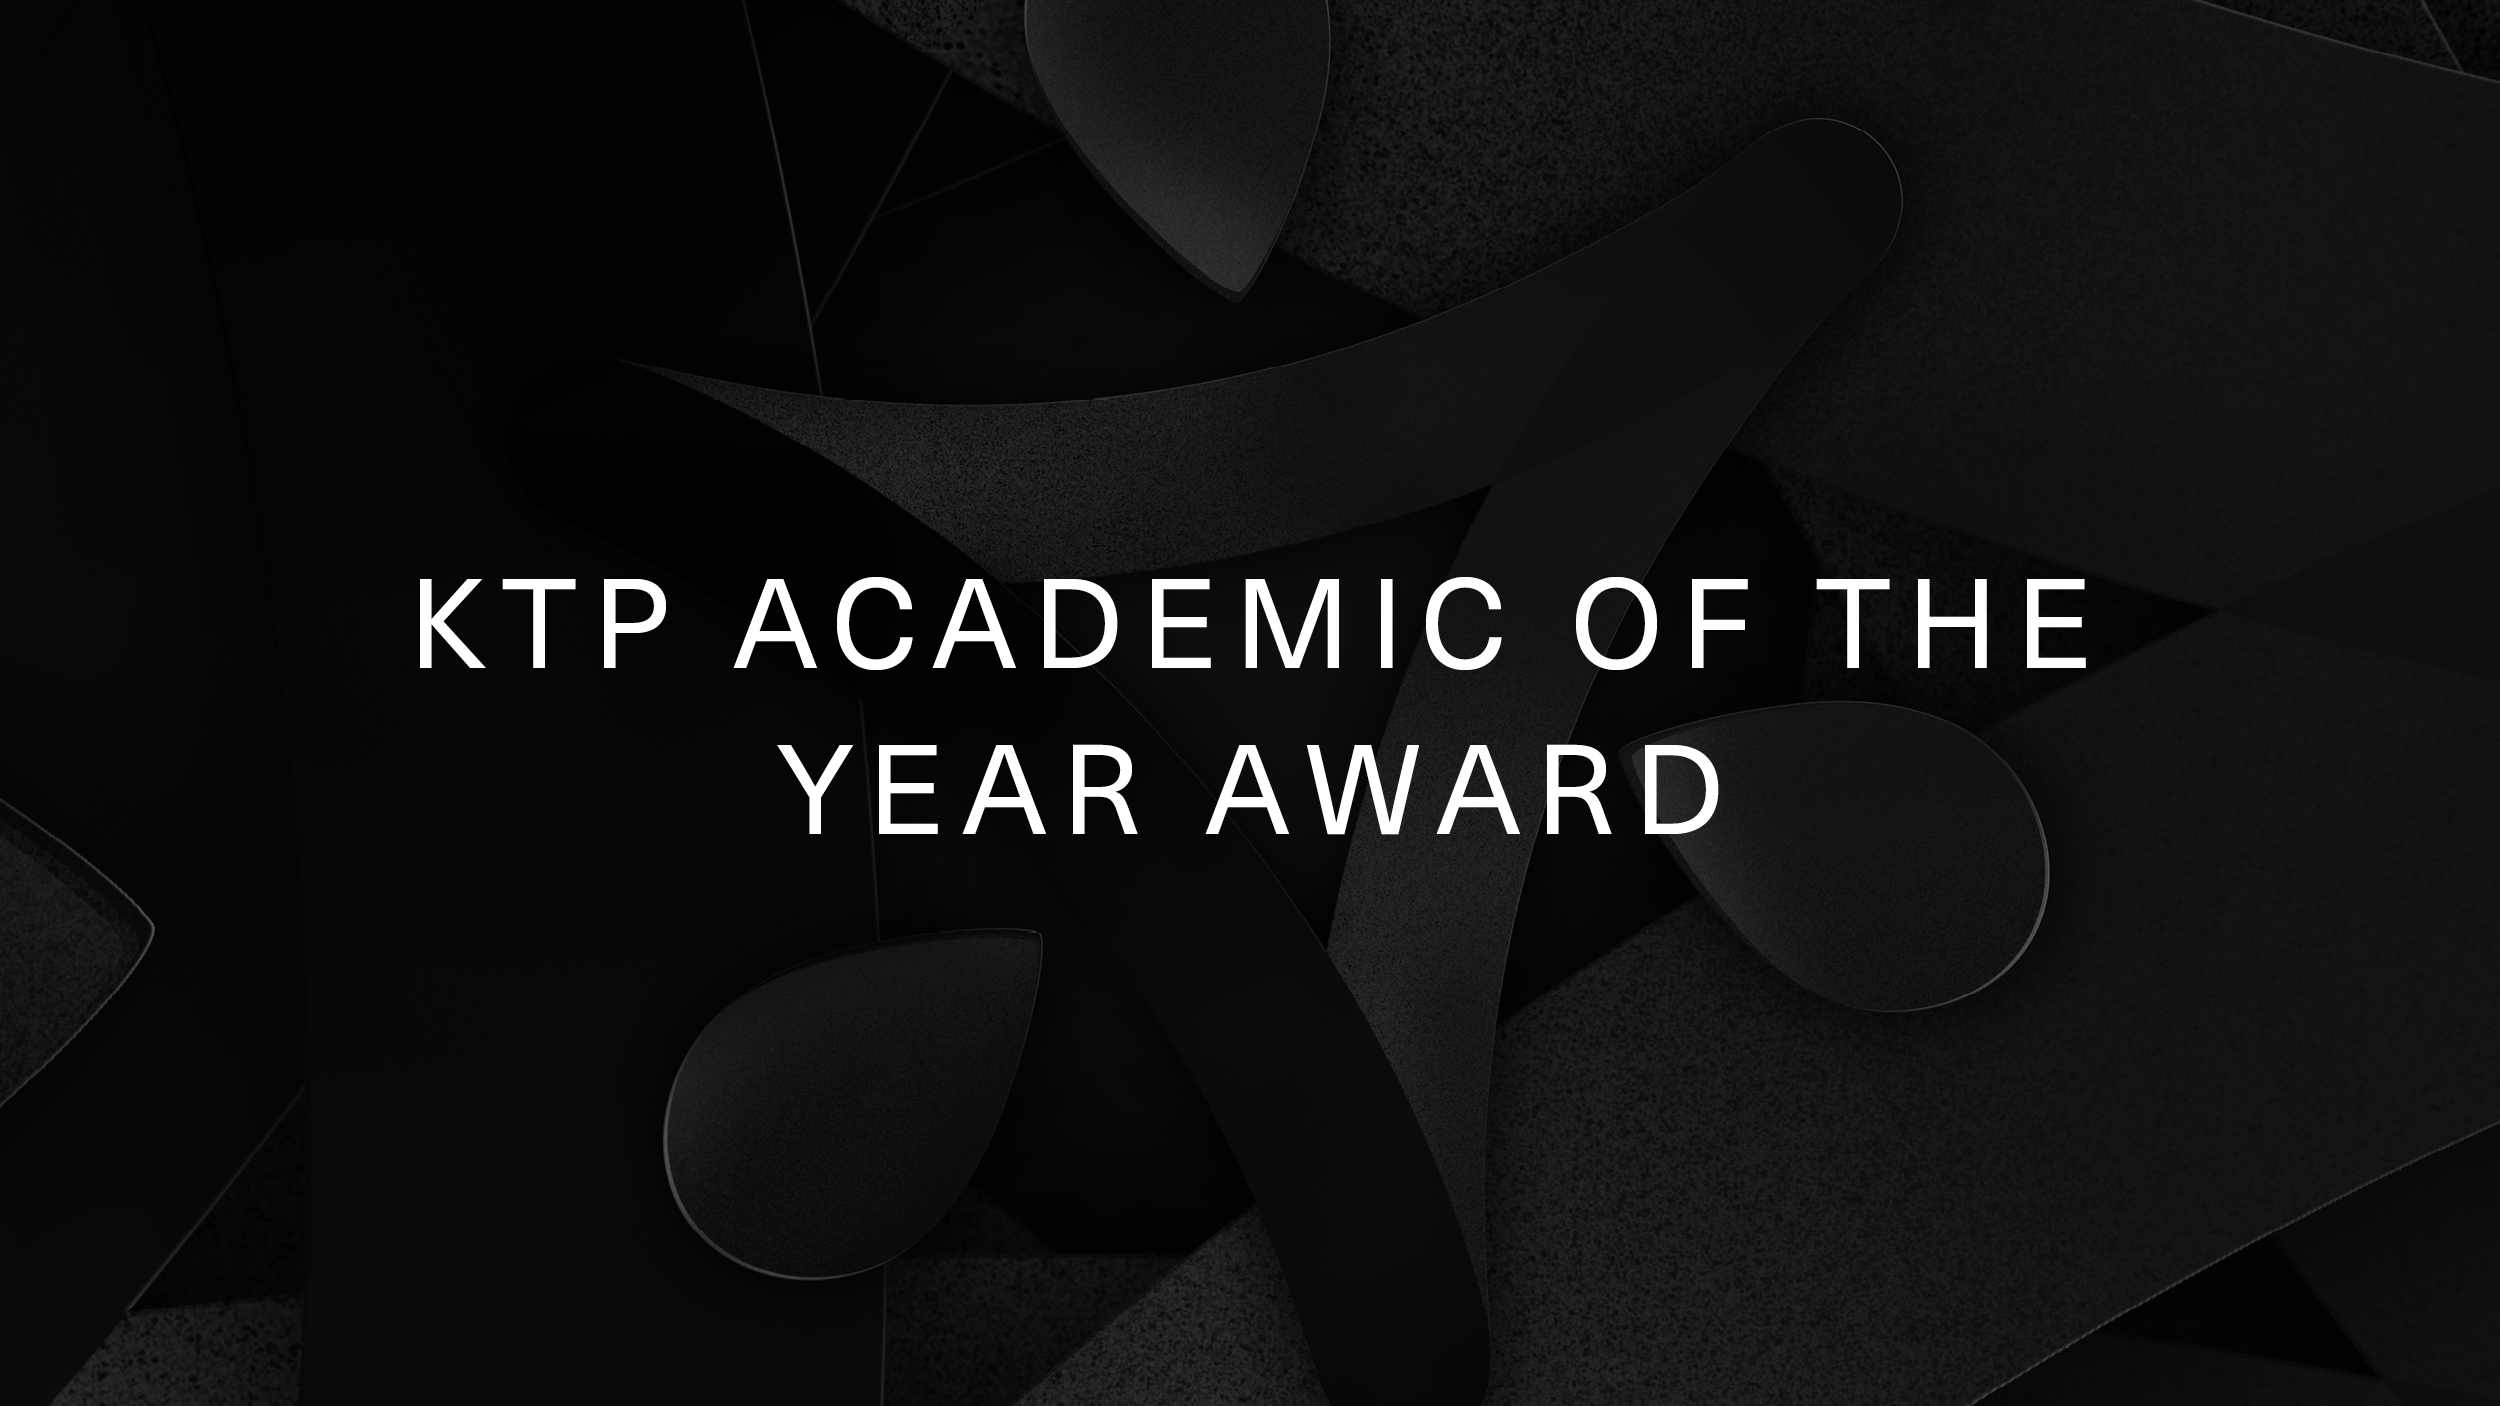 KTP Academic of the Year Award